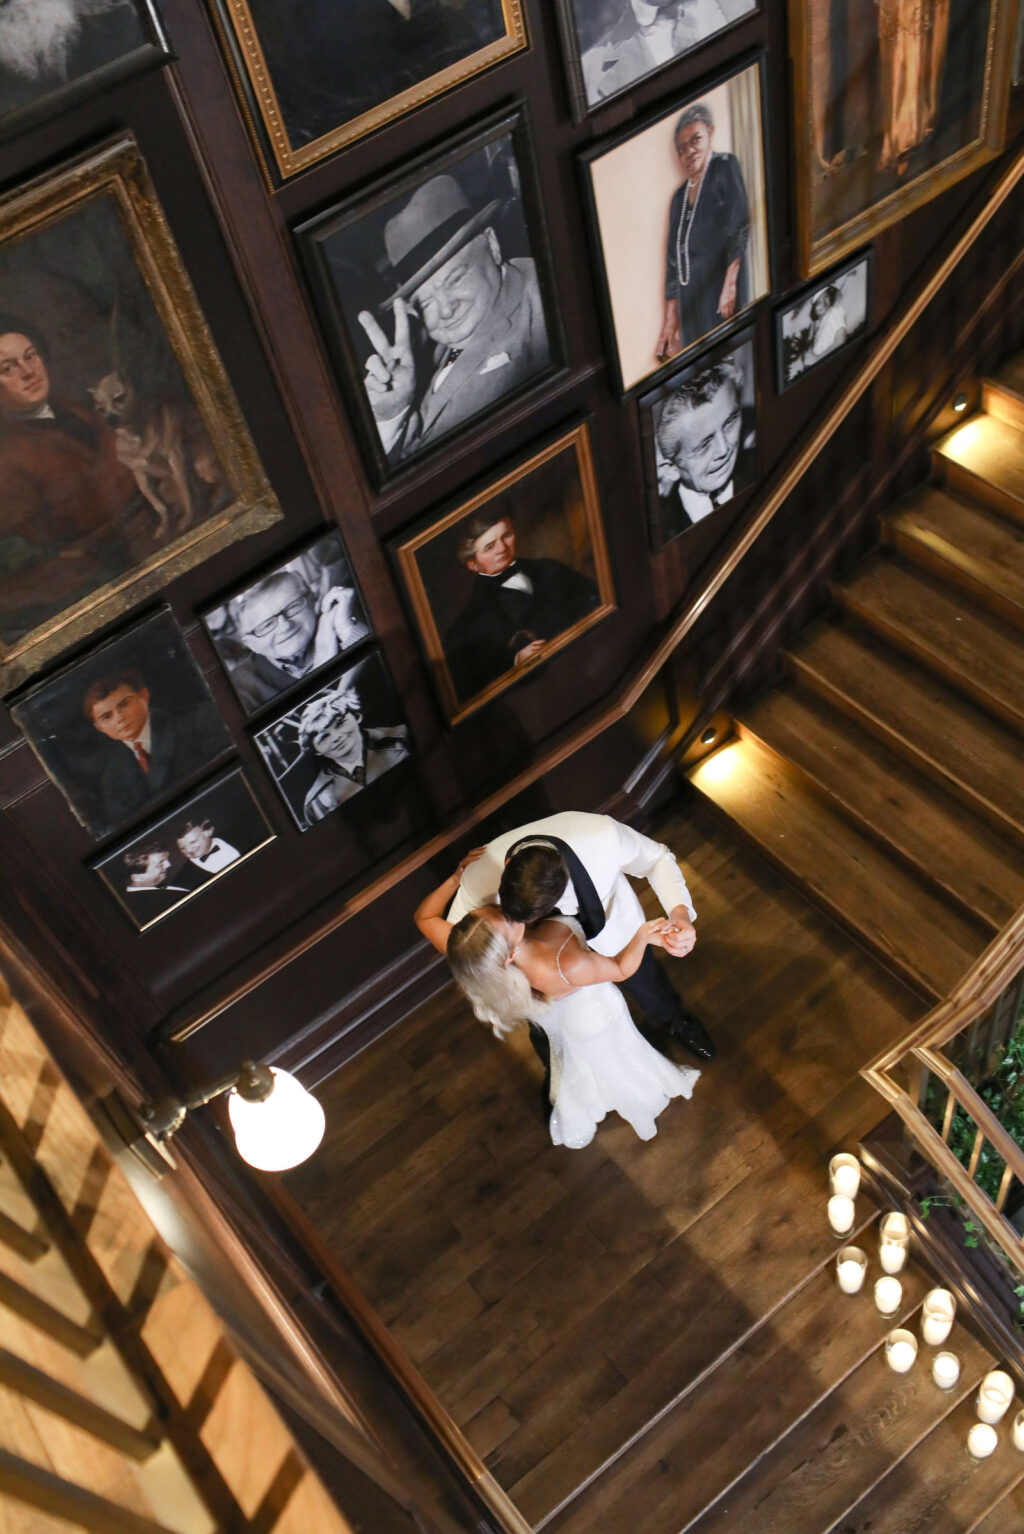 Modern Timeless Black and White Wedding, Bride Wearing Fitted Sequin Wedding Dress and Groom Wearing White and Black Tuxedo Climbing Staircase at Wedding Venue Oxford Exchange | Tampa Bay Wedding Photographer Lifelong Photography Studio